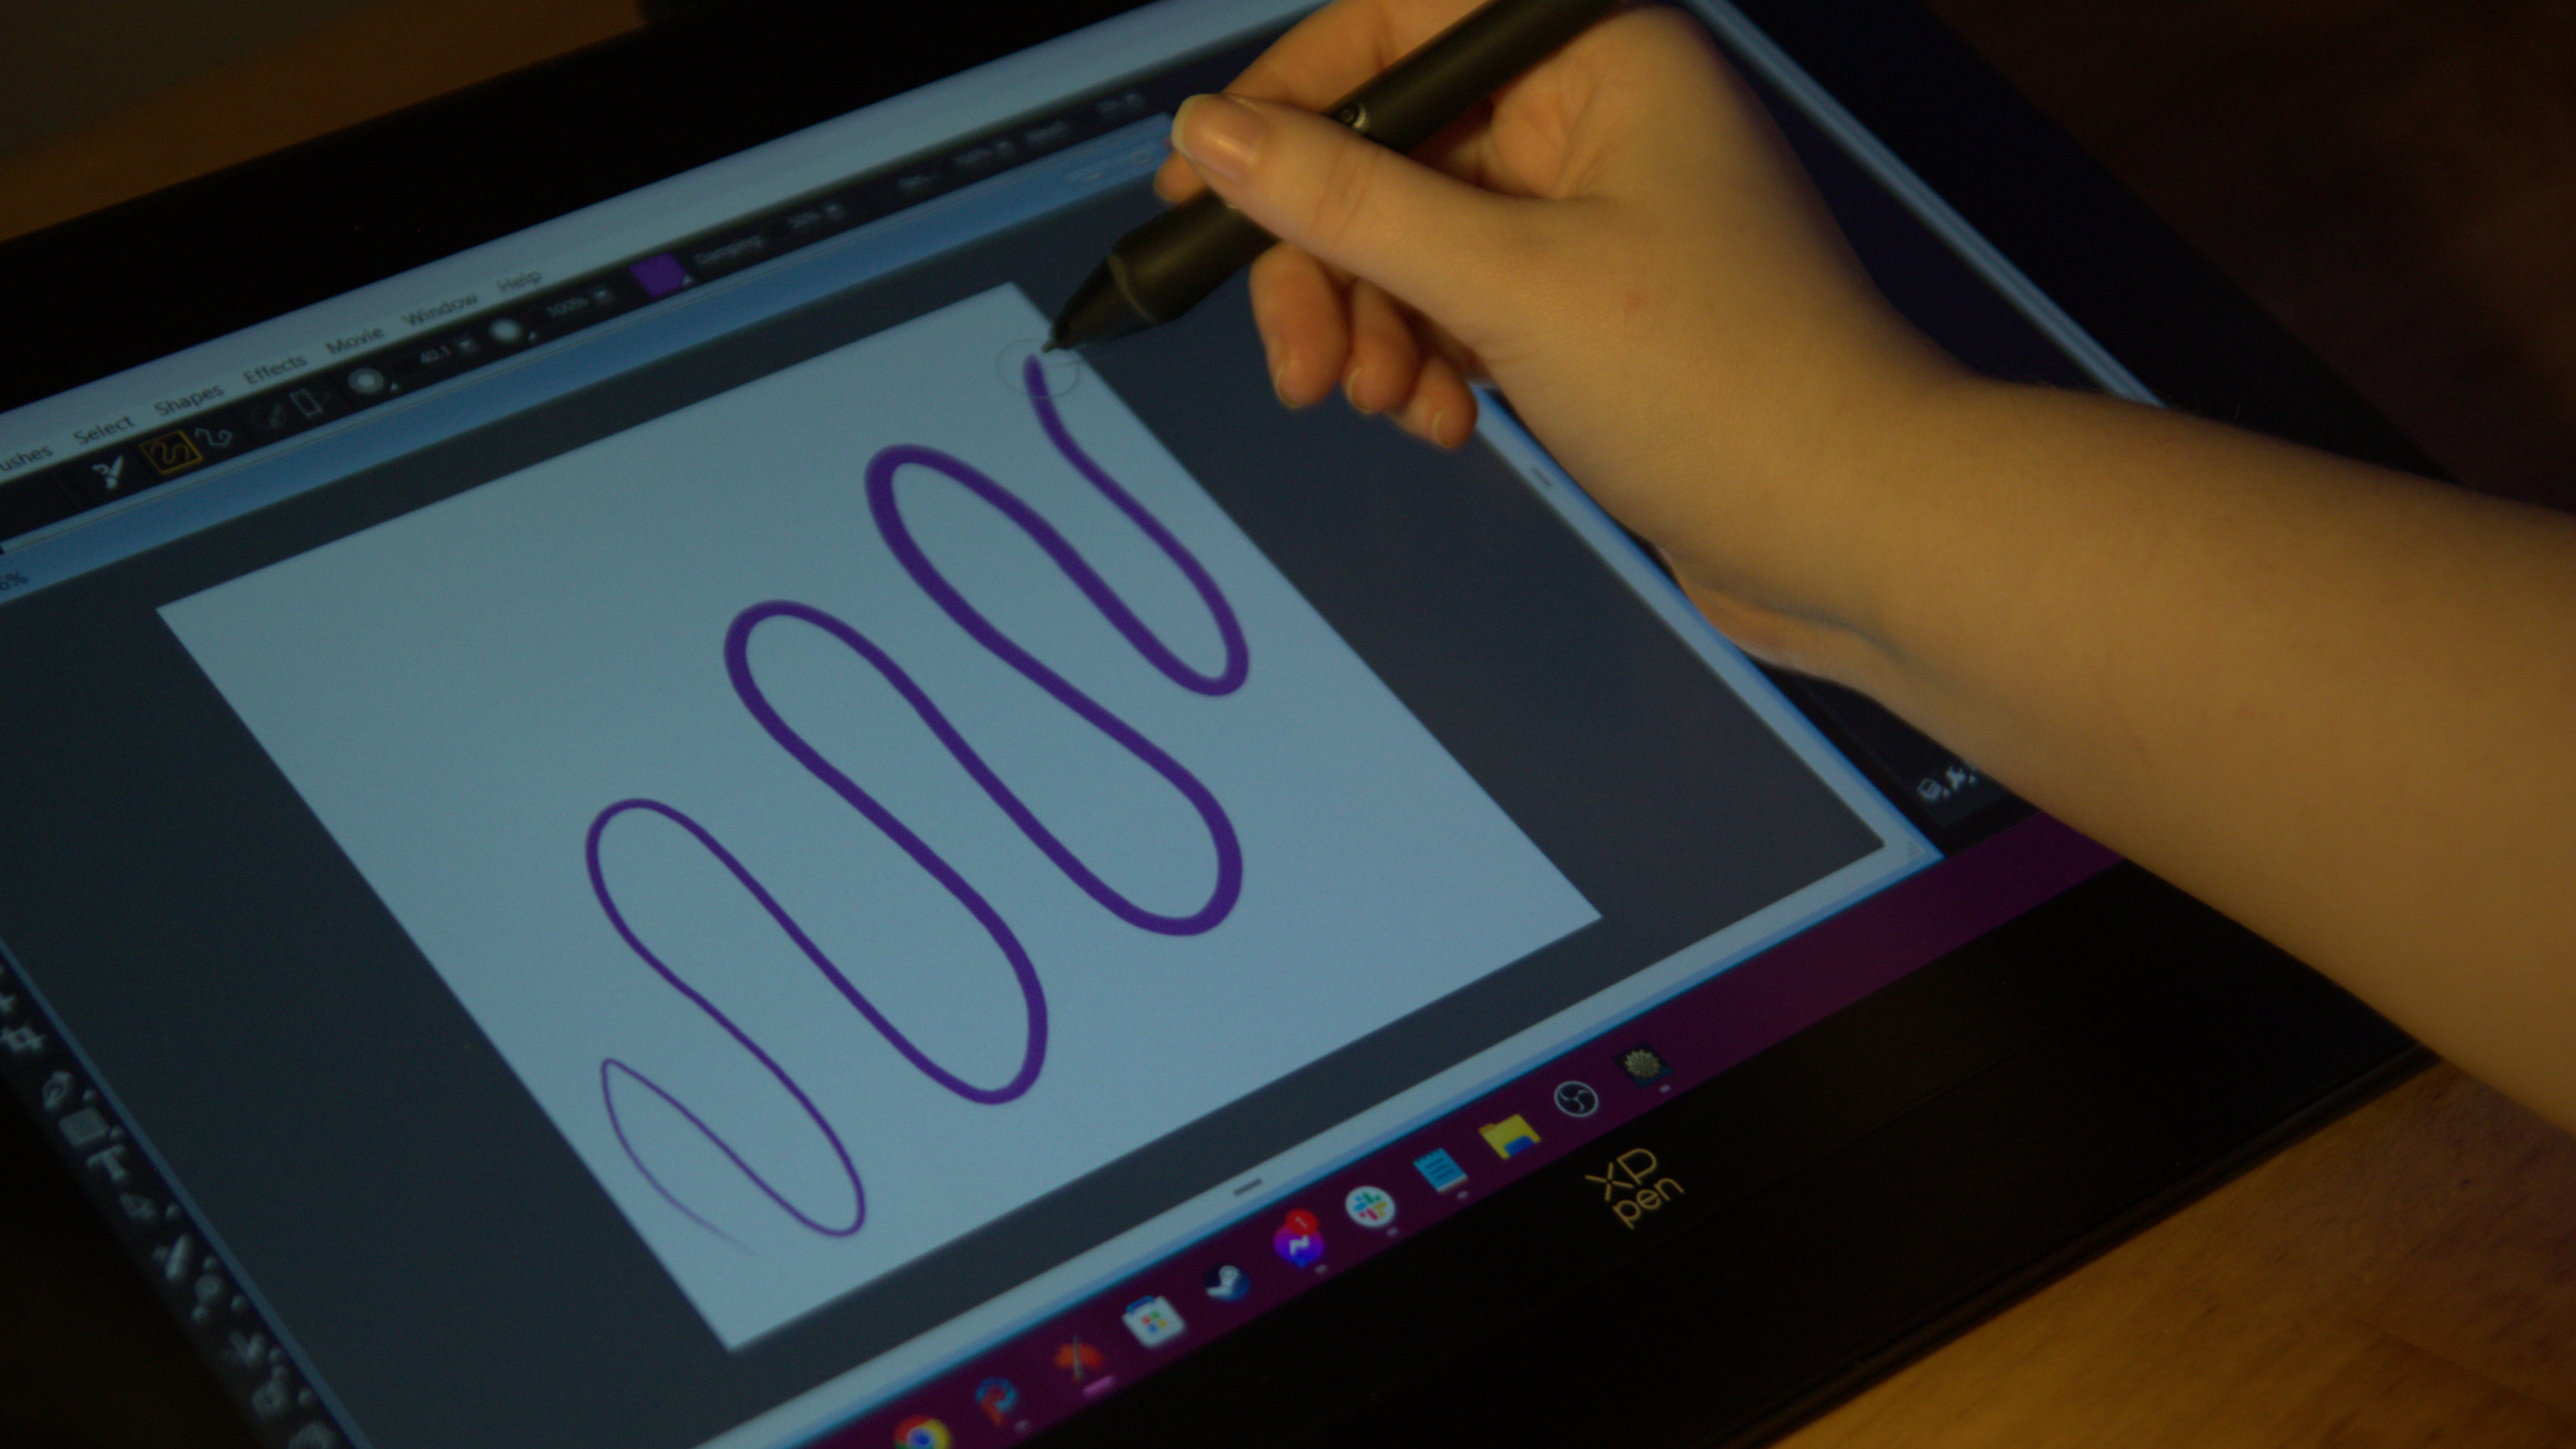 XP Pen has released a 16-inch drawing monitor with the all new 16K pressure X3 Stylus.